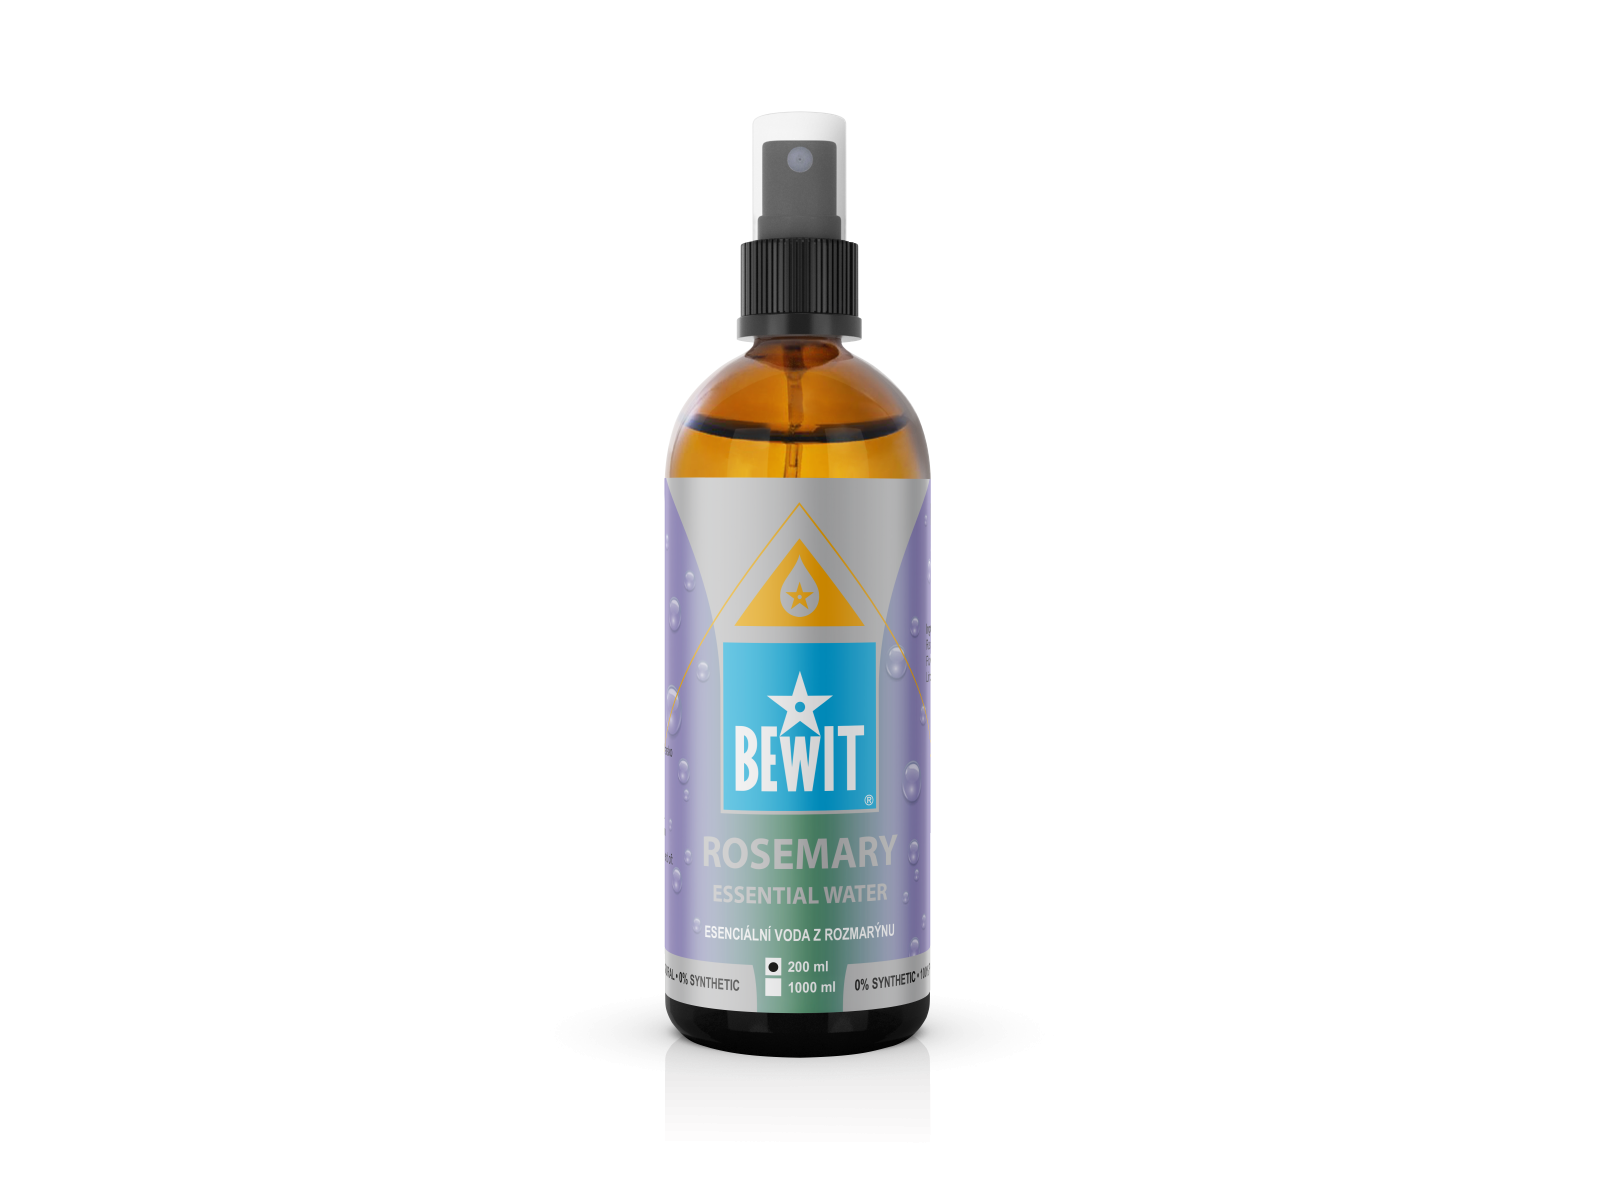 BEWIT Rosemary essential water - 100% NATURAL HYDROLYTE